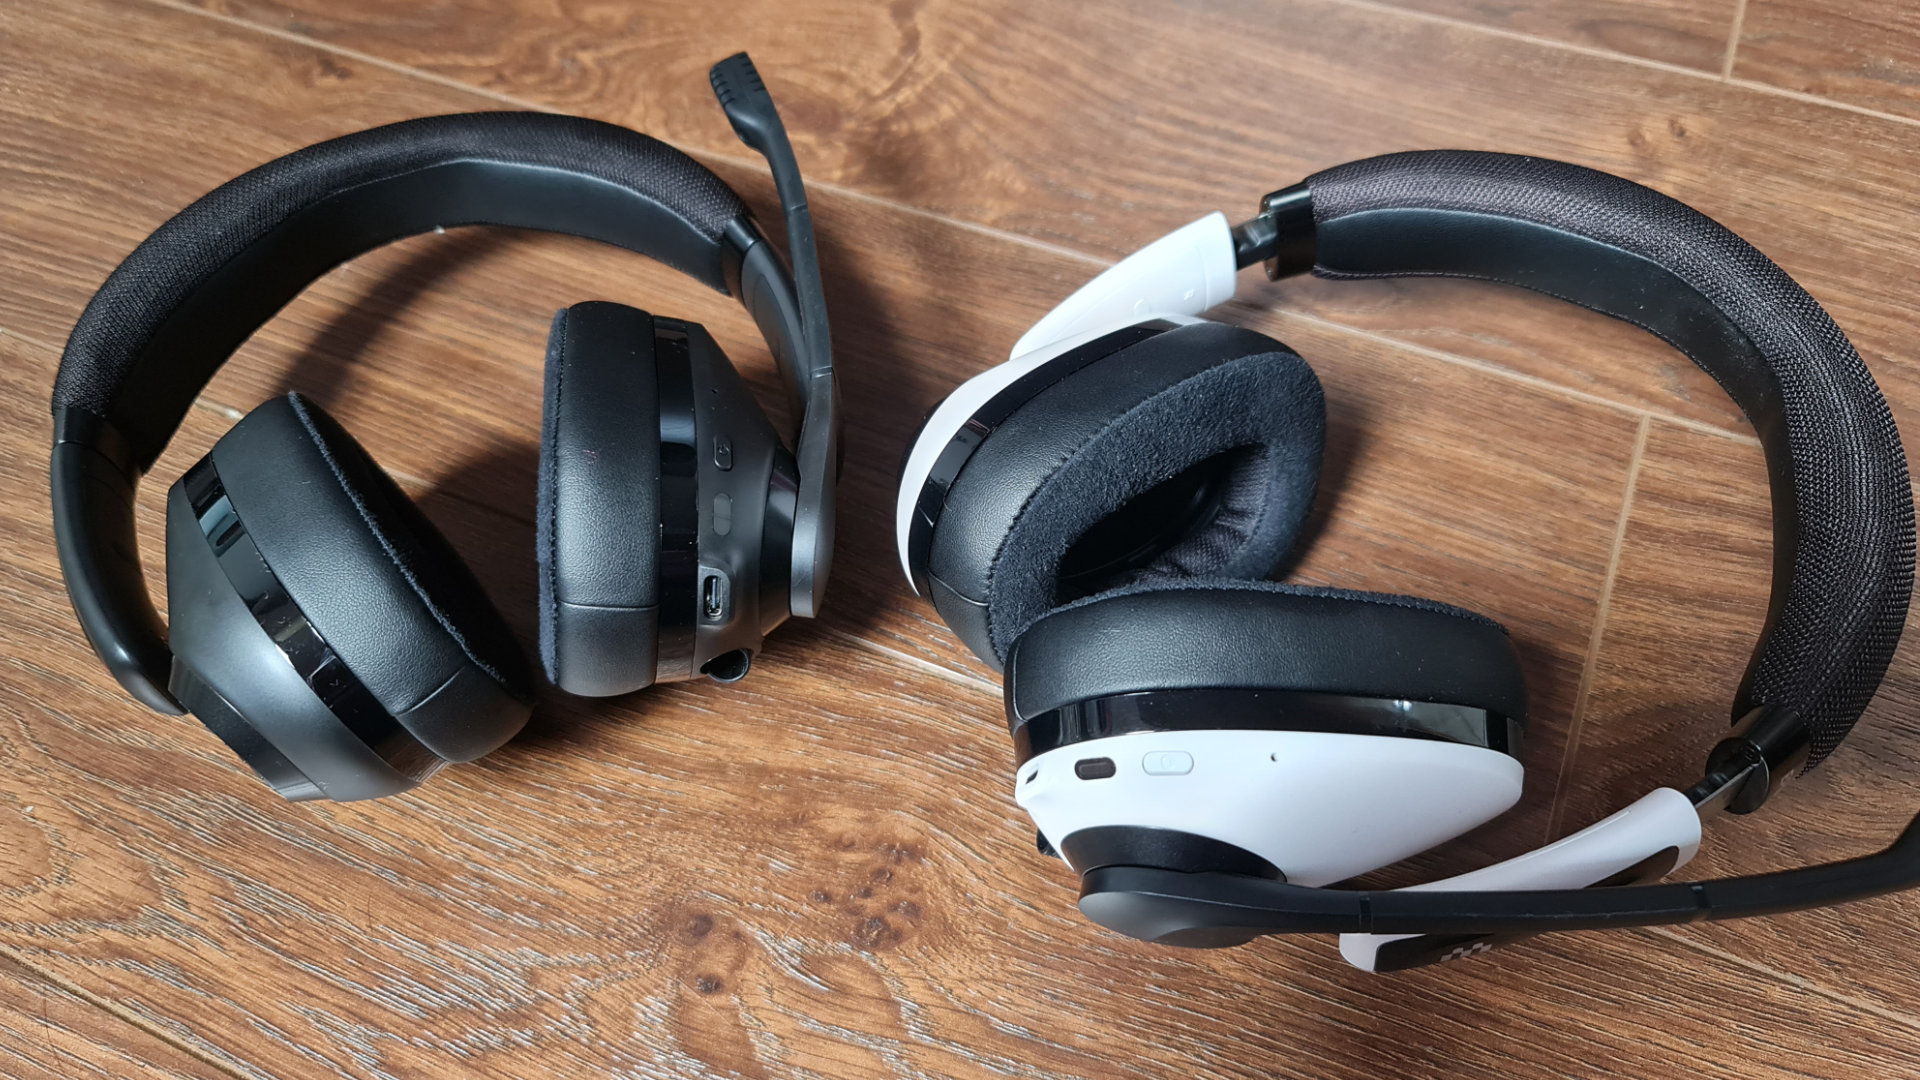 EPOS H3 Hybrid review – not a great headset for gaming PCs